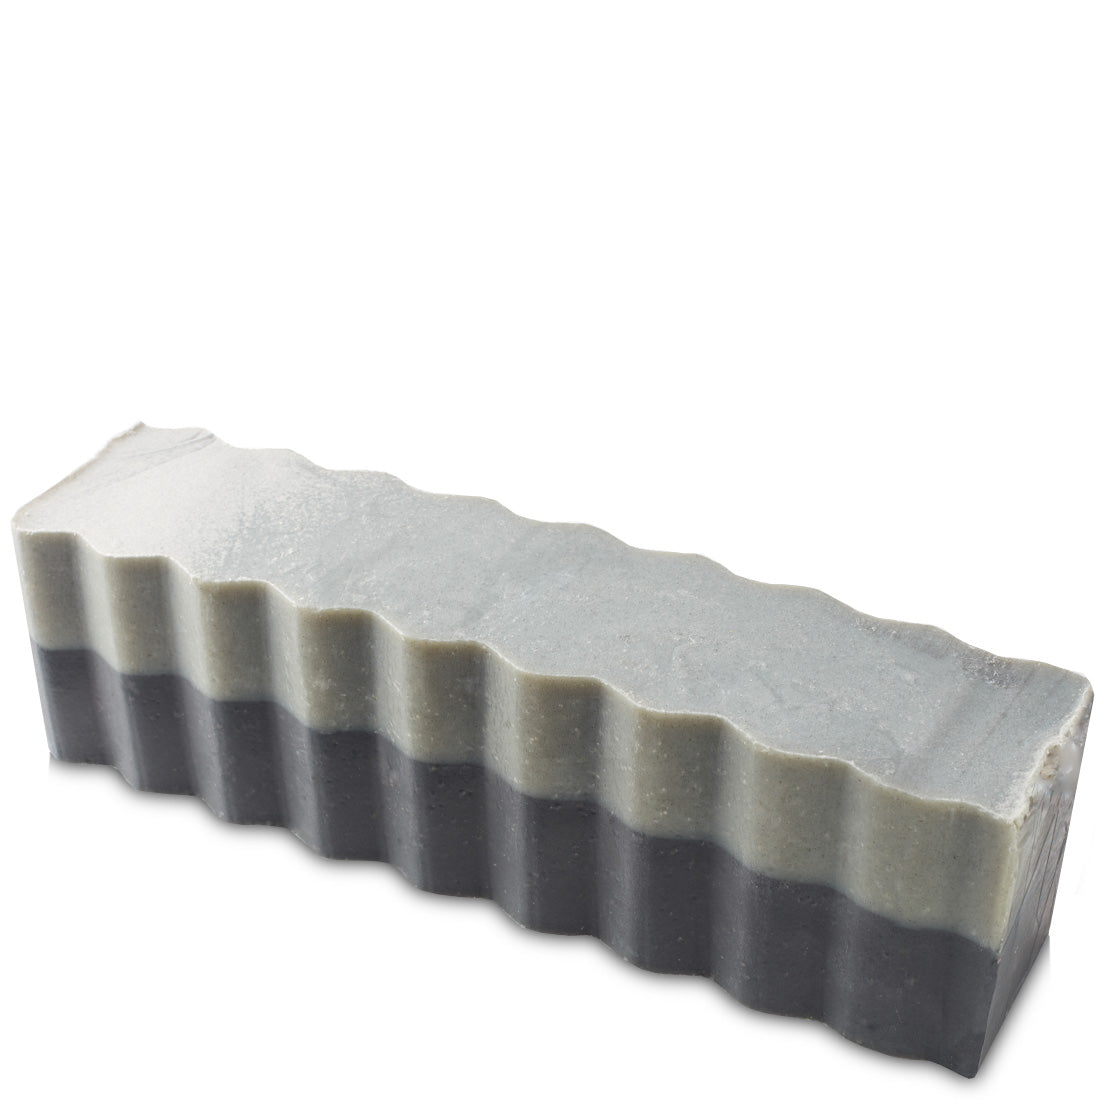 Rectangular two-tone grey wavy 45 ounce brick of Charcoal scented Zum Bar Soap